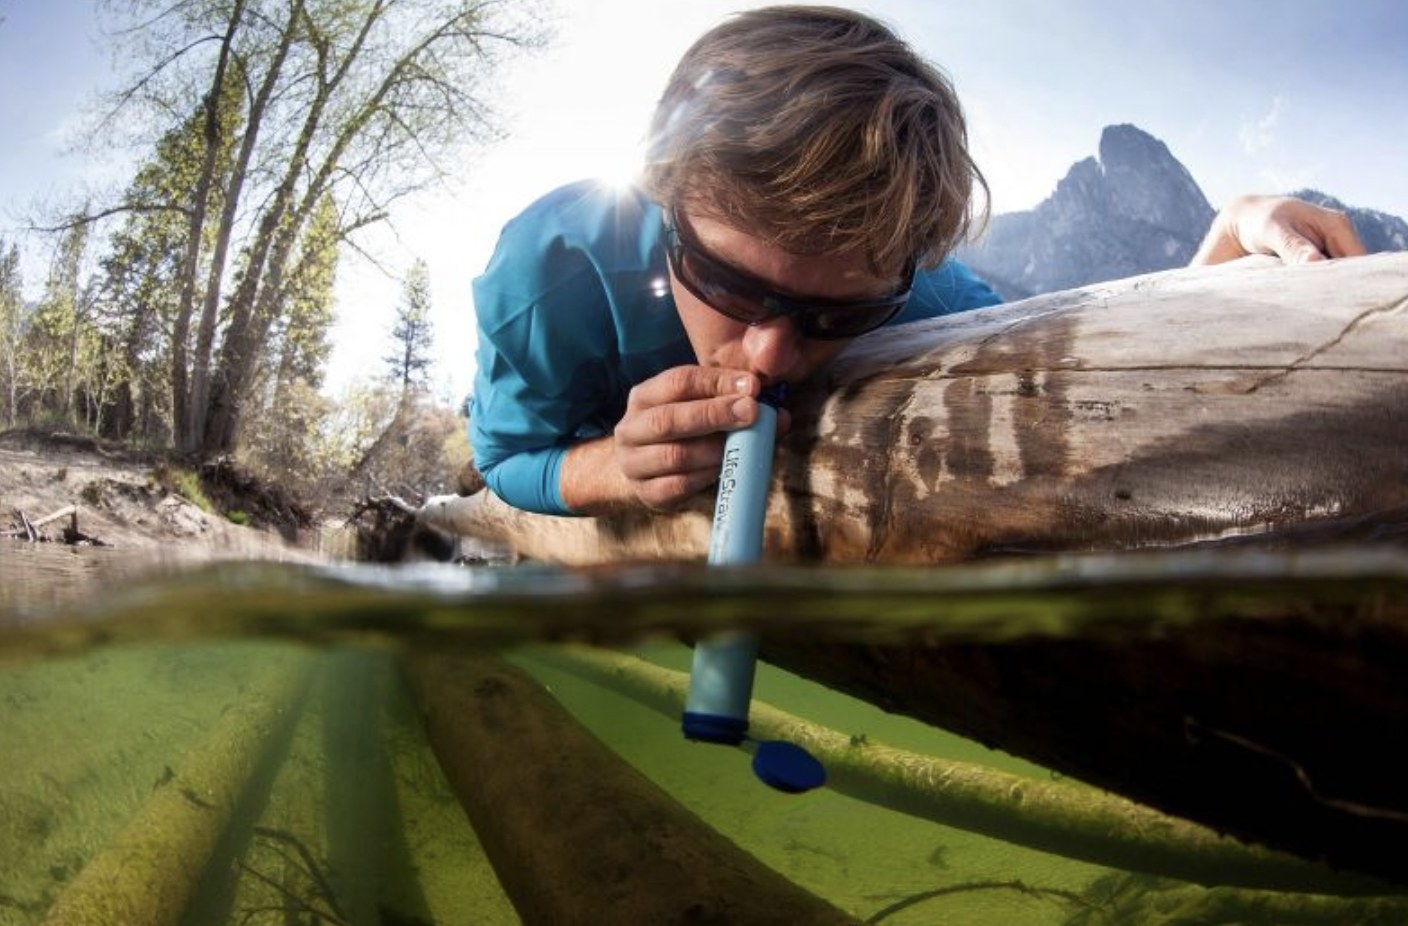 model drinking from a stream through the lifestraw